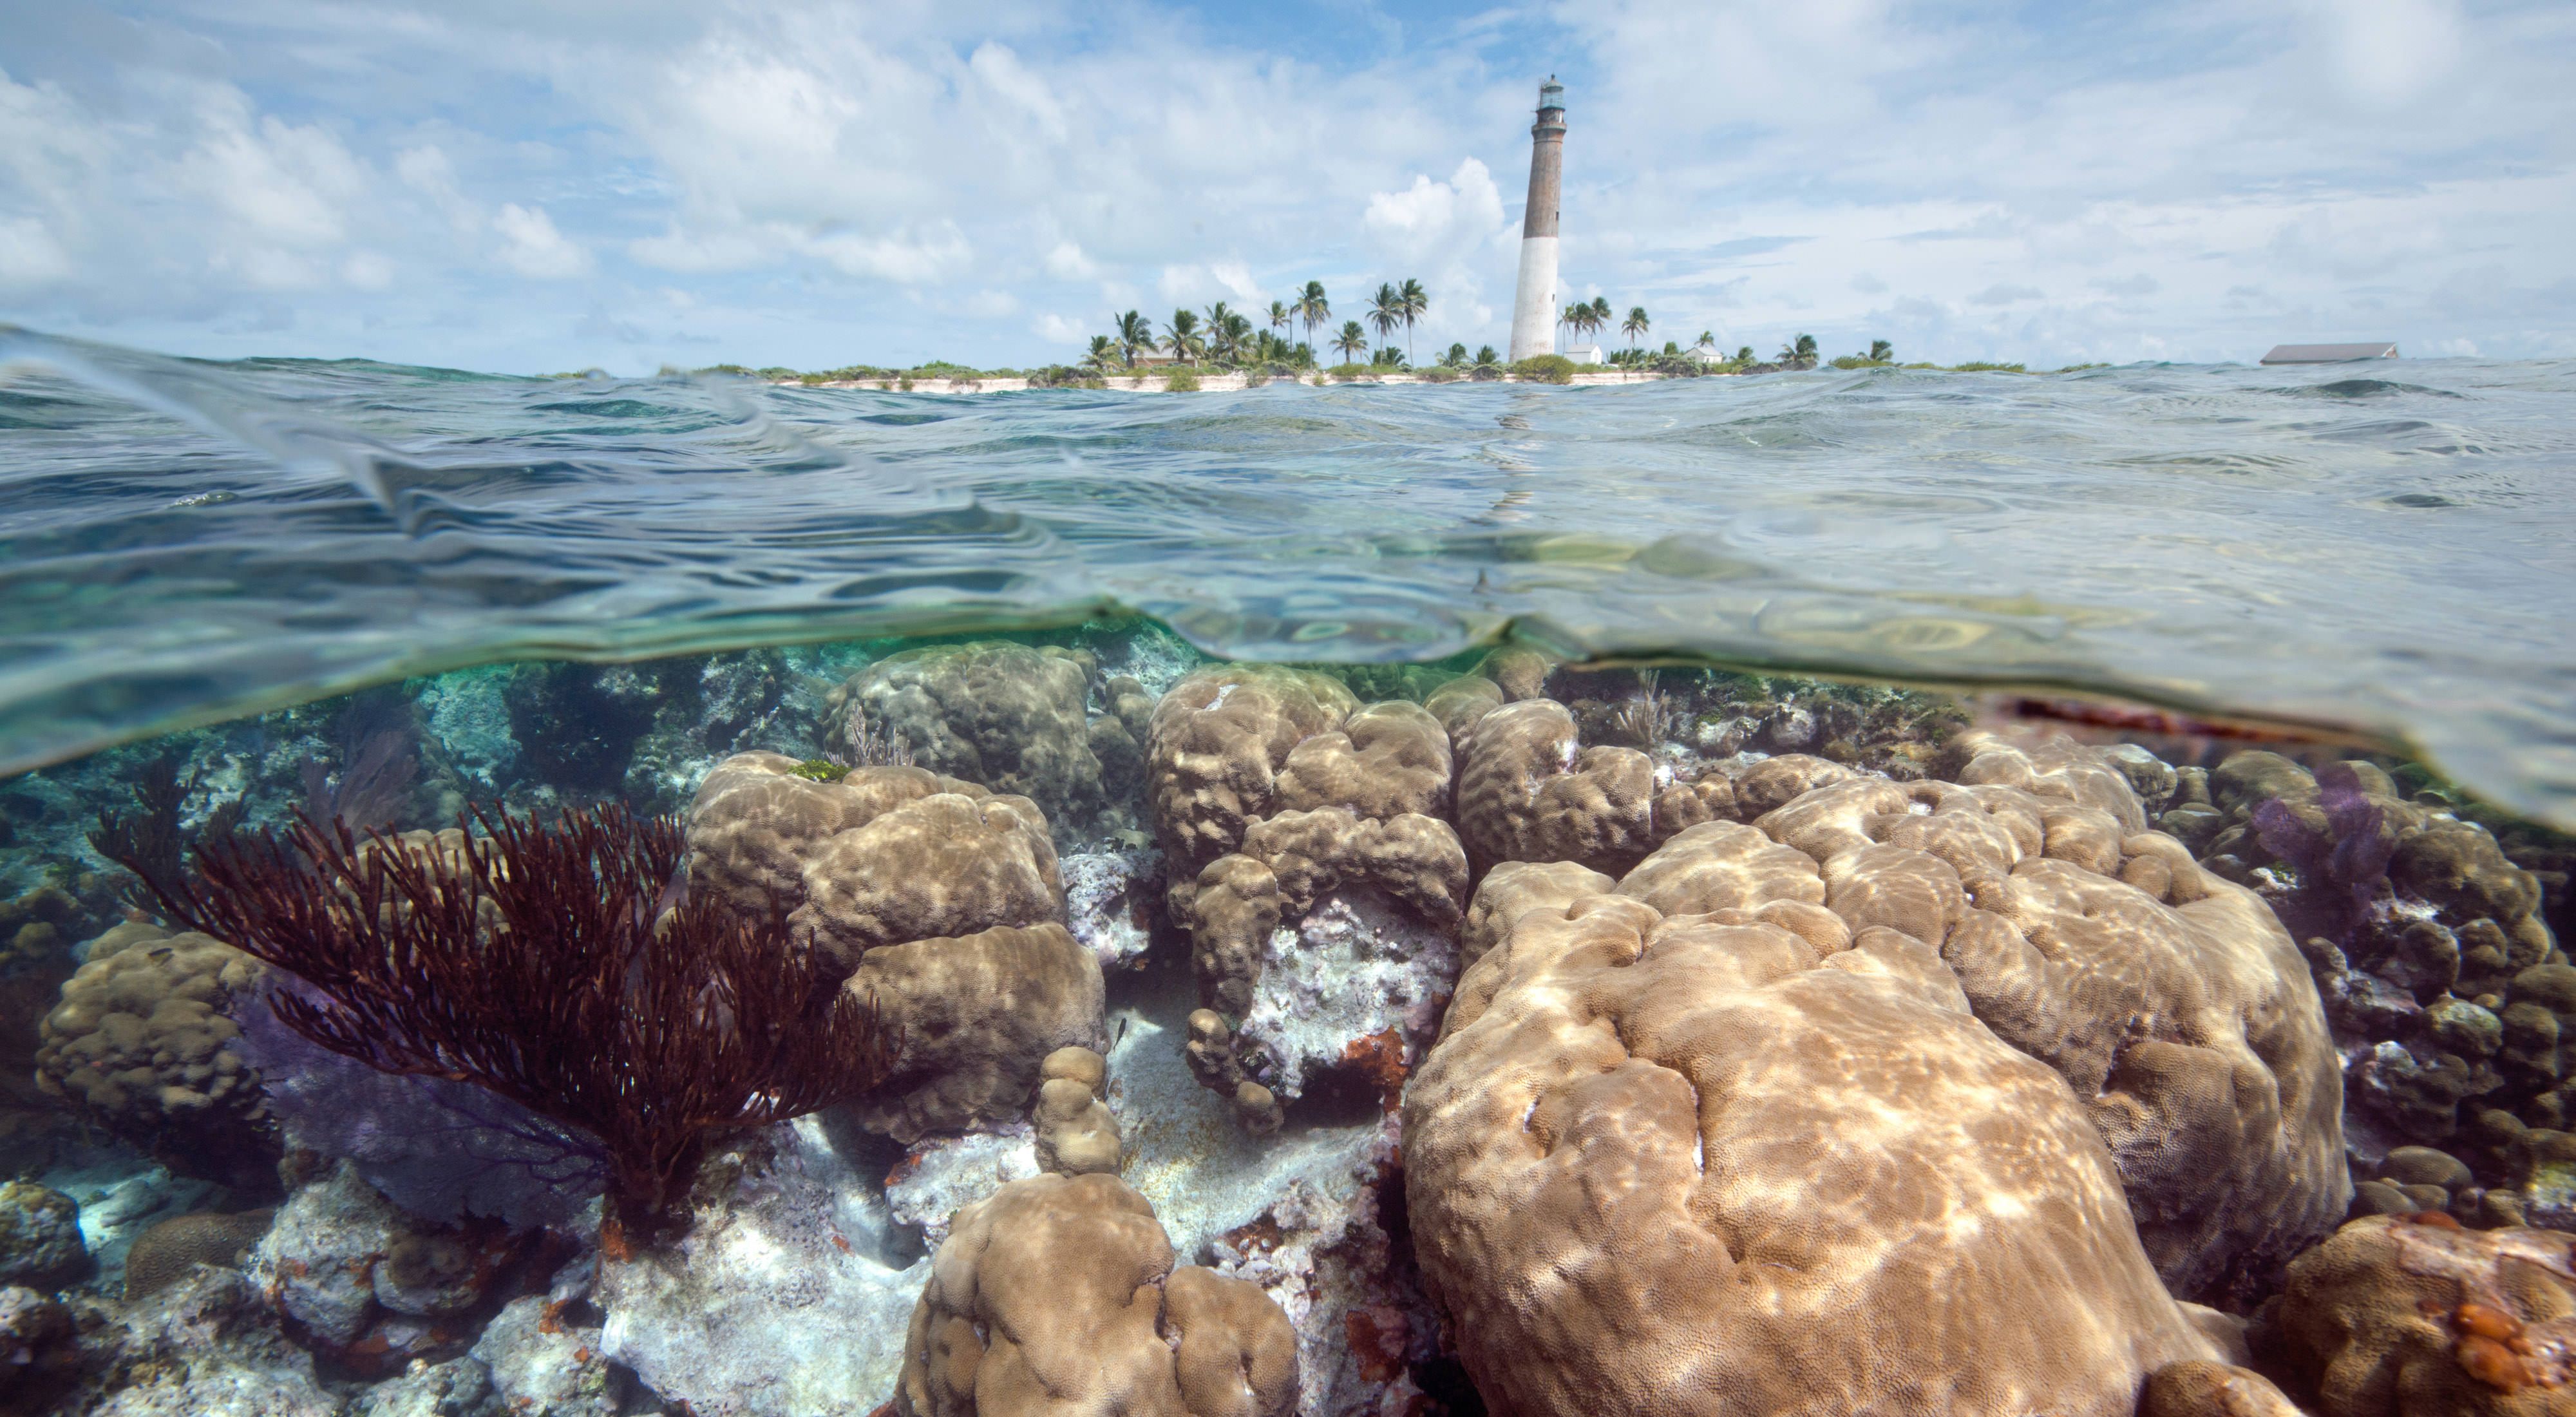 Sunlight dapples coral in a Florida reef. A tall lighthouse rises from a small island in the background, surrounded by gently lapping water.